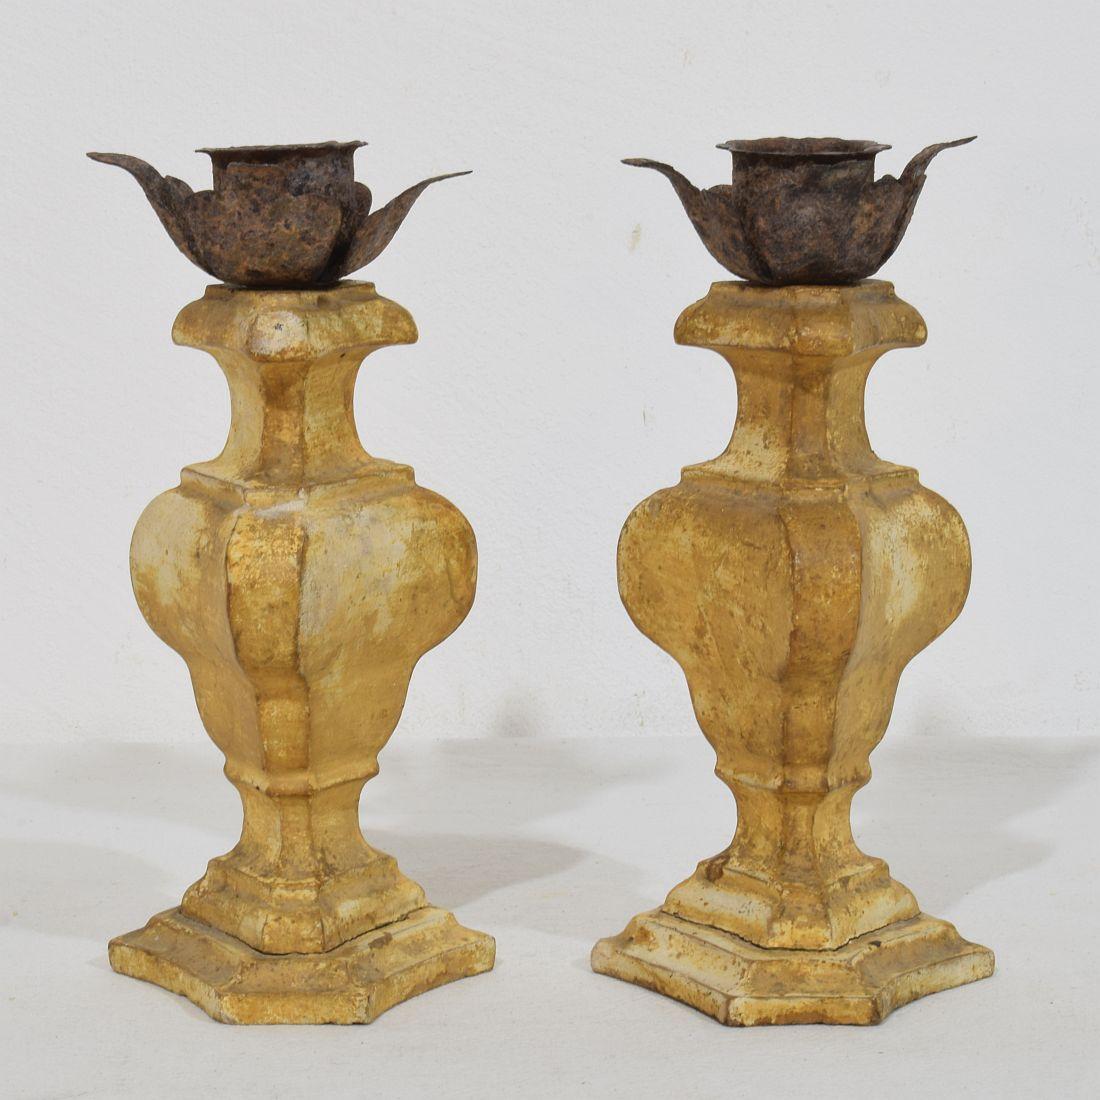 Couple of Small Late 18th Century Italian Neoclassical Giltwood Candleholders For Sale 1